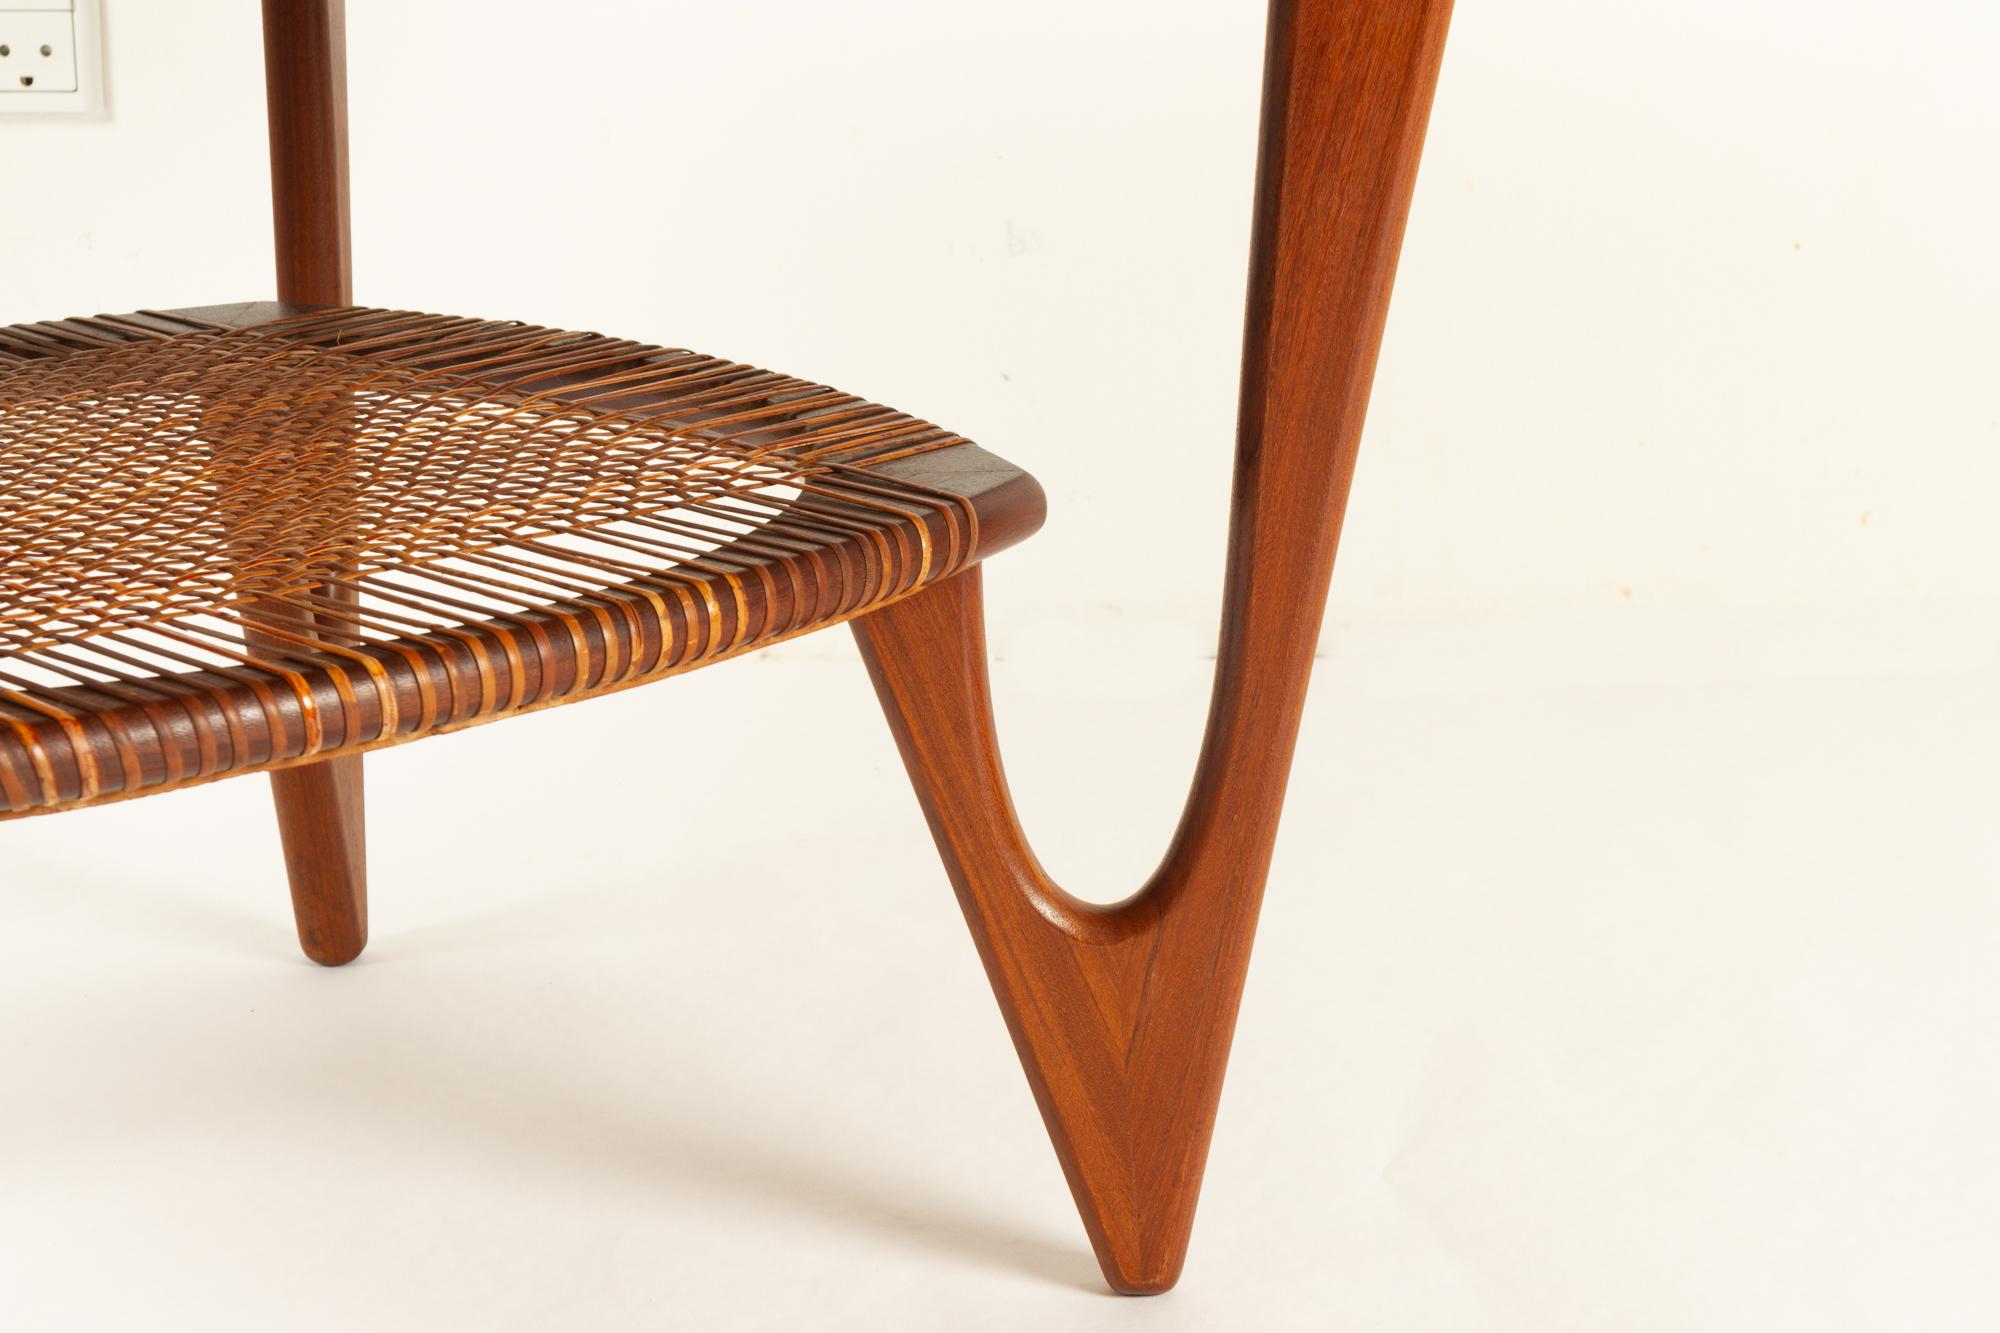 Mid-20th Century Vintage Danish Rosewood Coffee Table by Kurt Østervig for Jason Møbler, 1950s For Sale